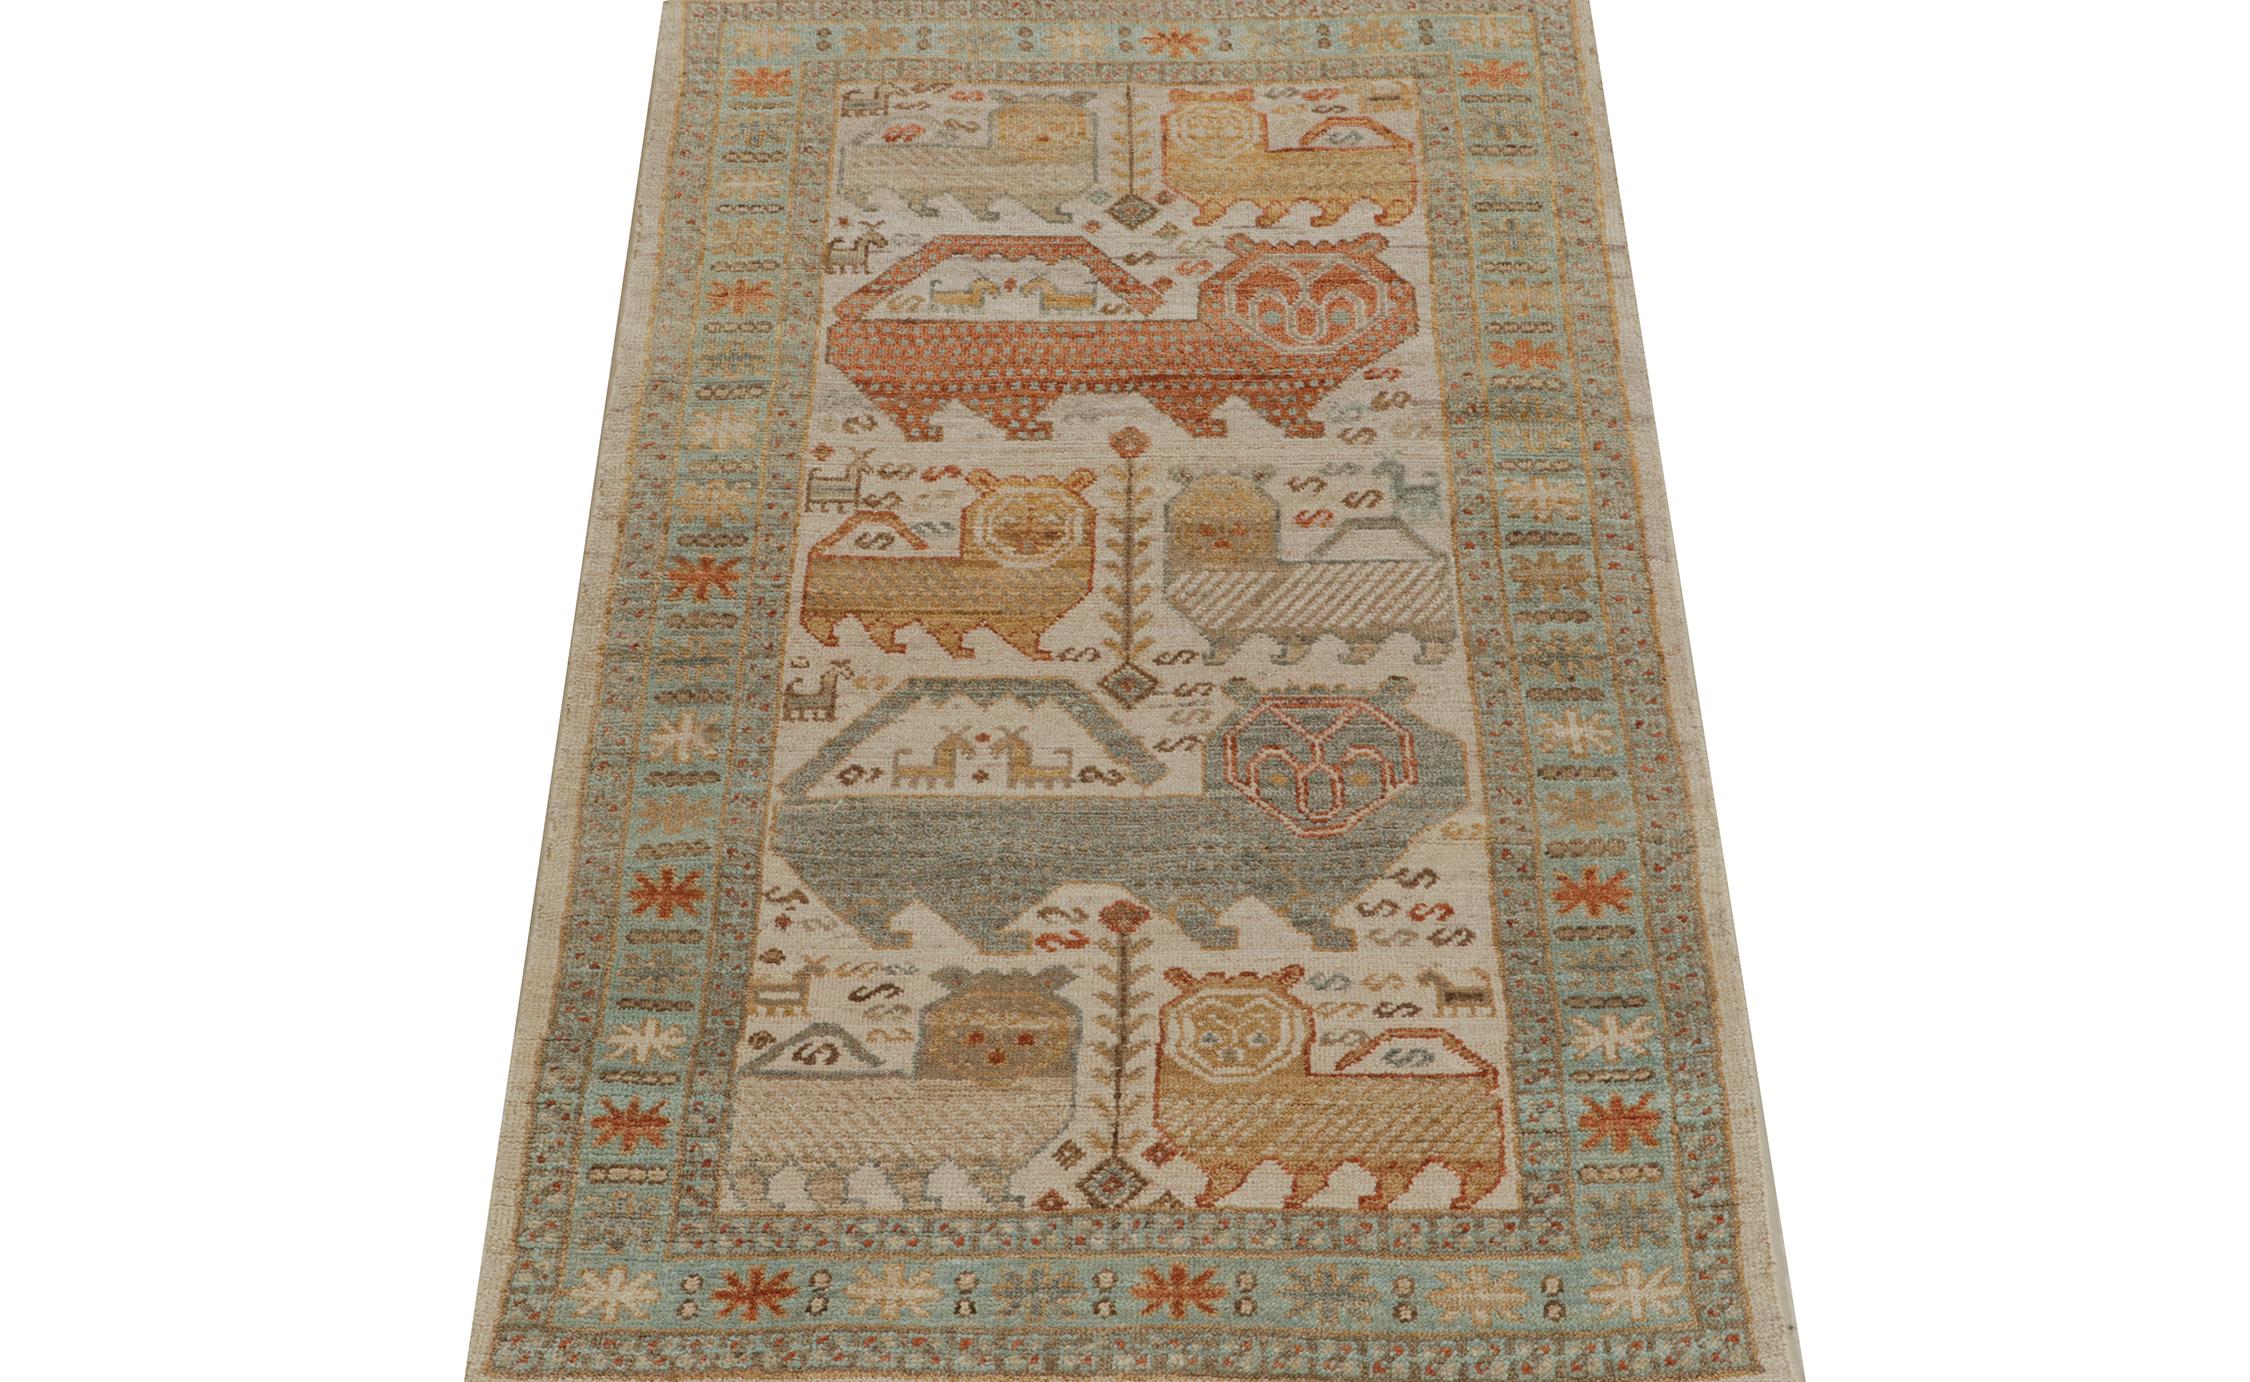 Indian  Rug & Kilim’s Tribal style runner in Beige-Brown, Blue and Red Pictorials For Sale